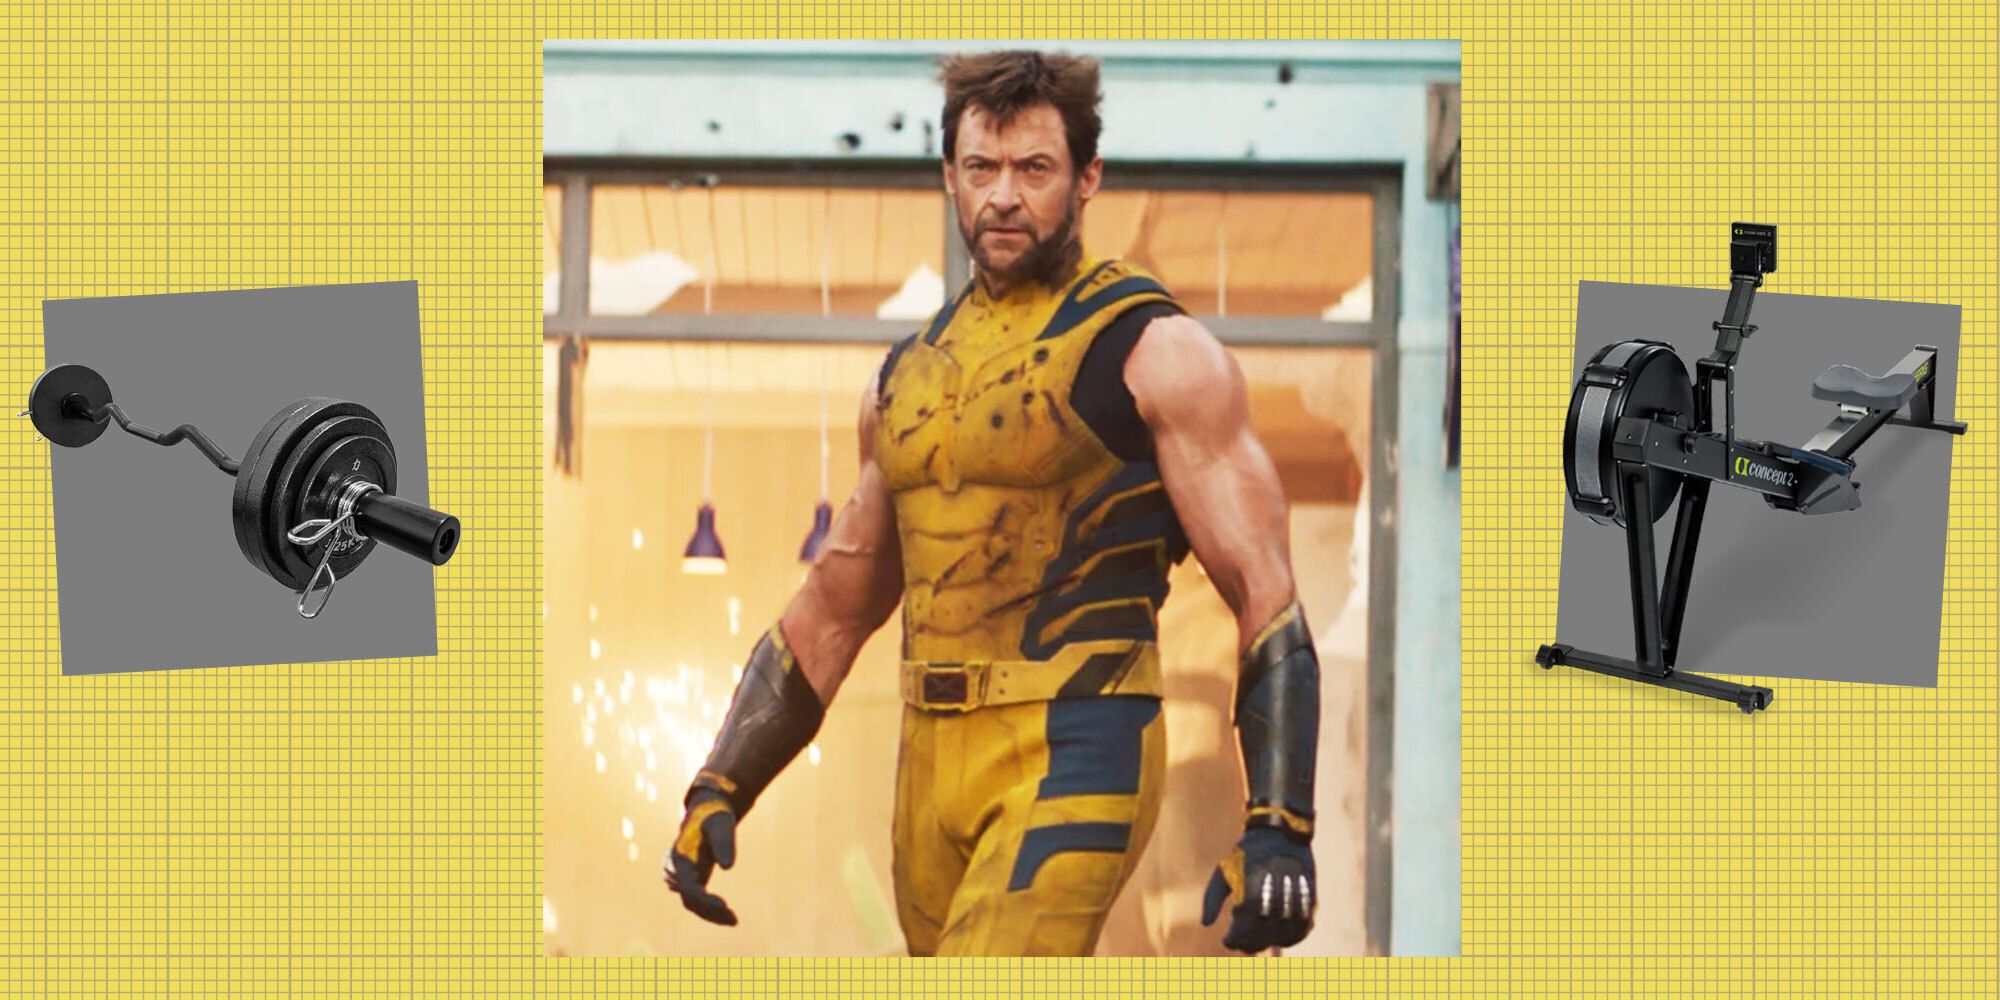 Hugh Jackman Got Jacked Again for 'Deadpool & Wolverine' With This Gym Gear